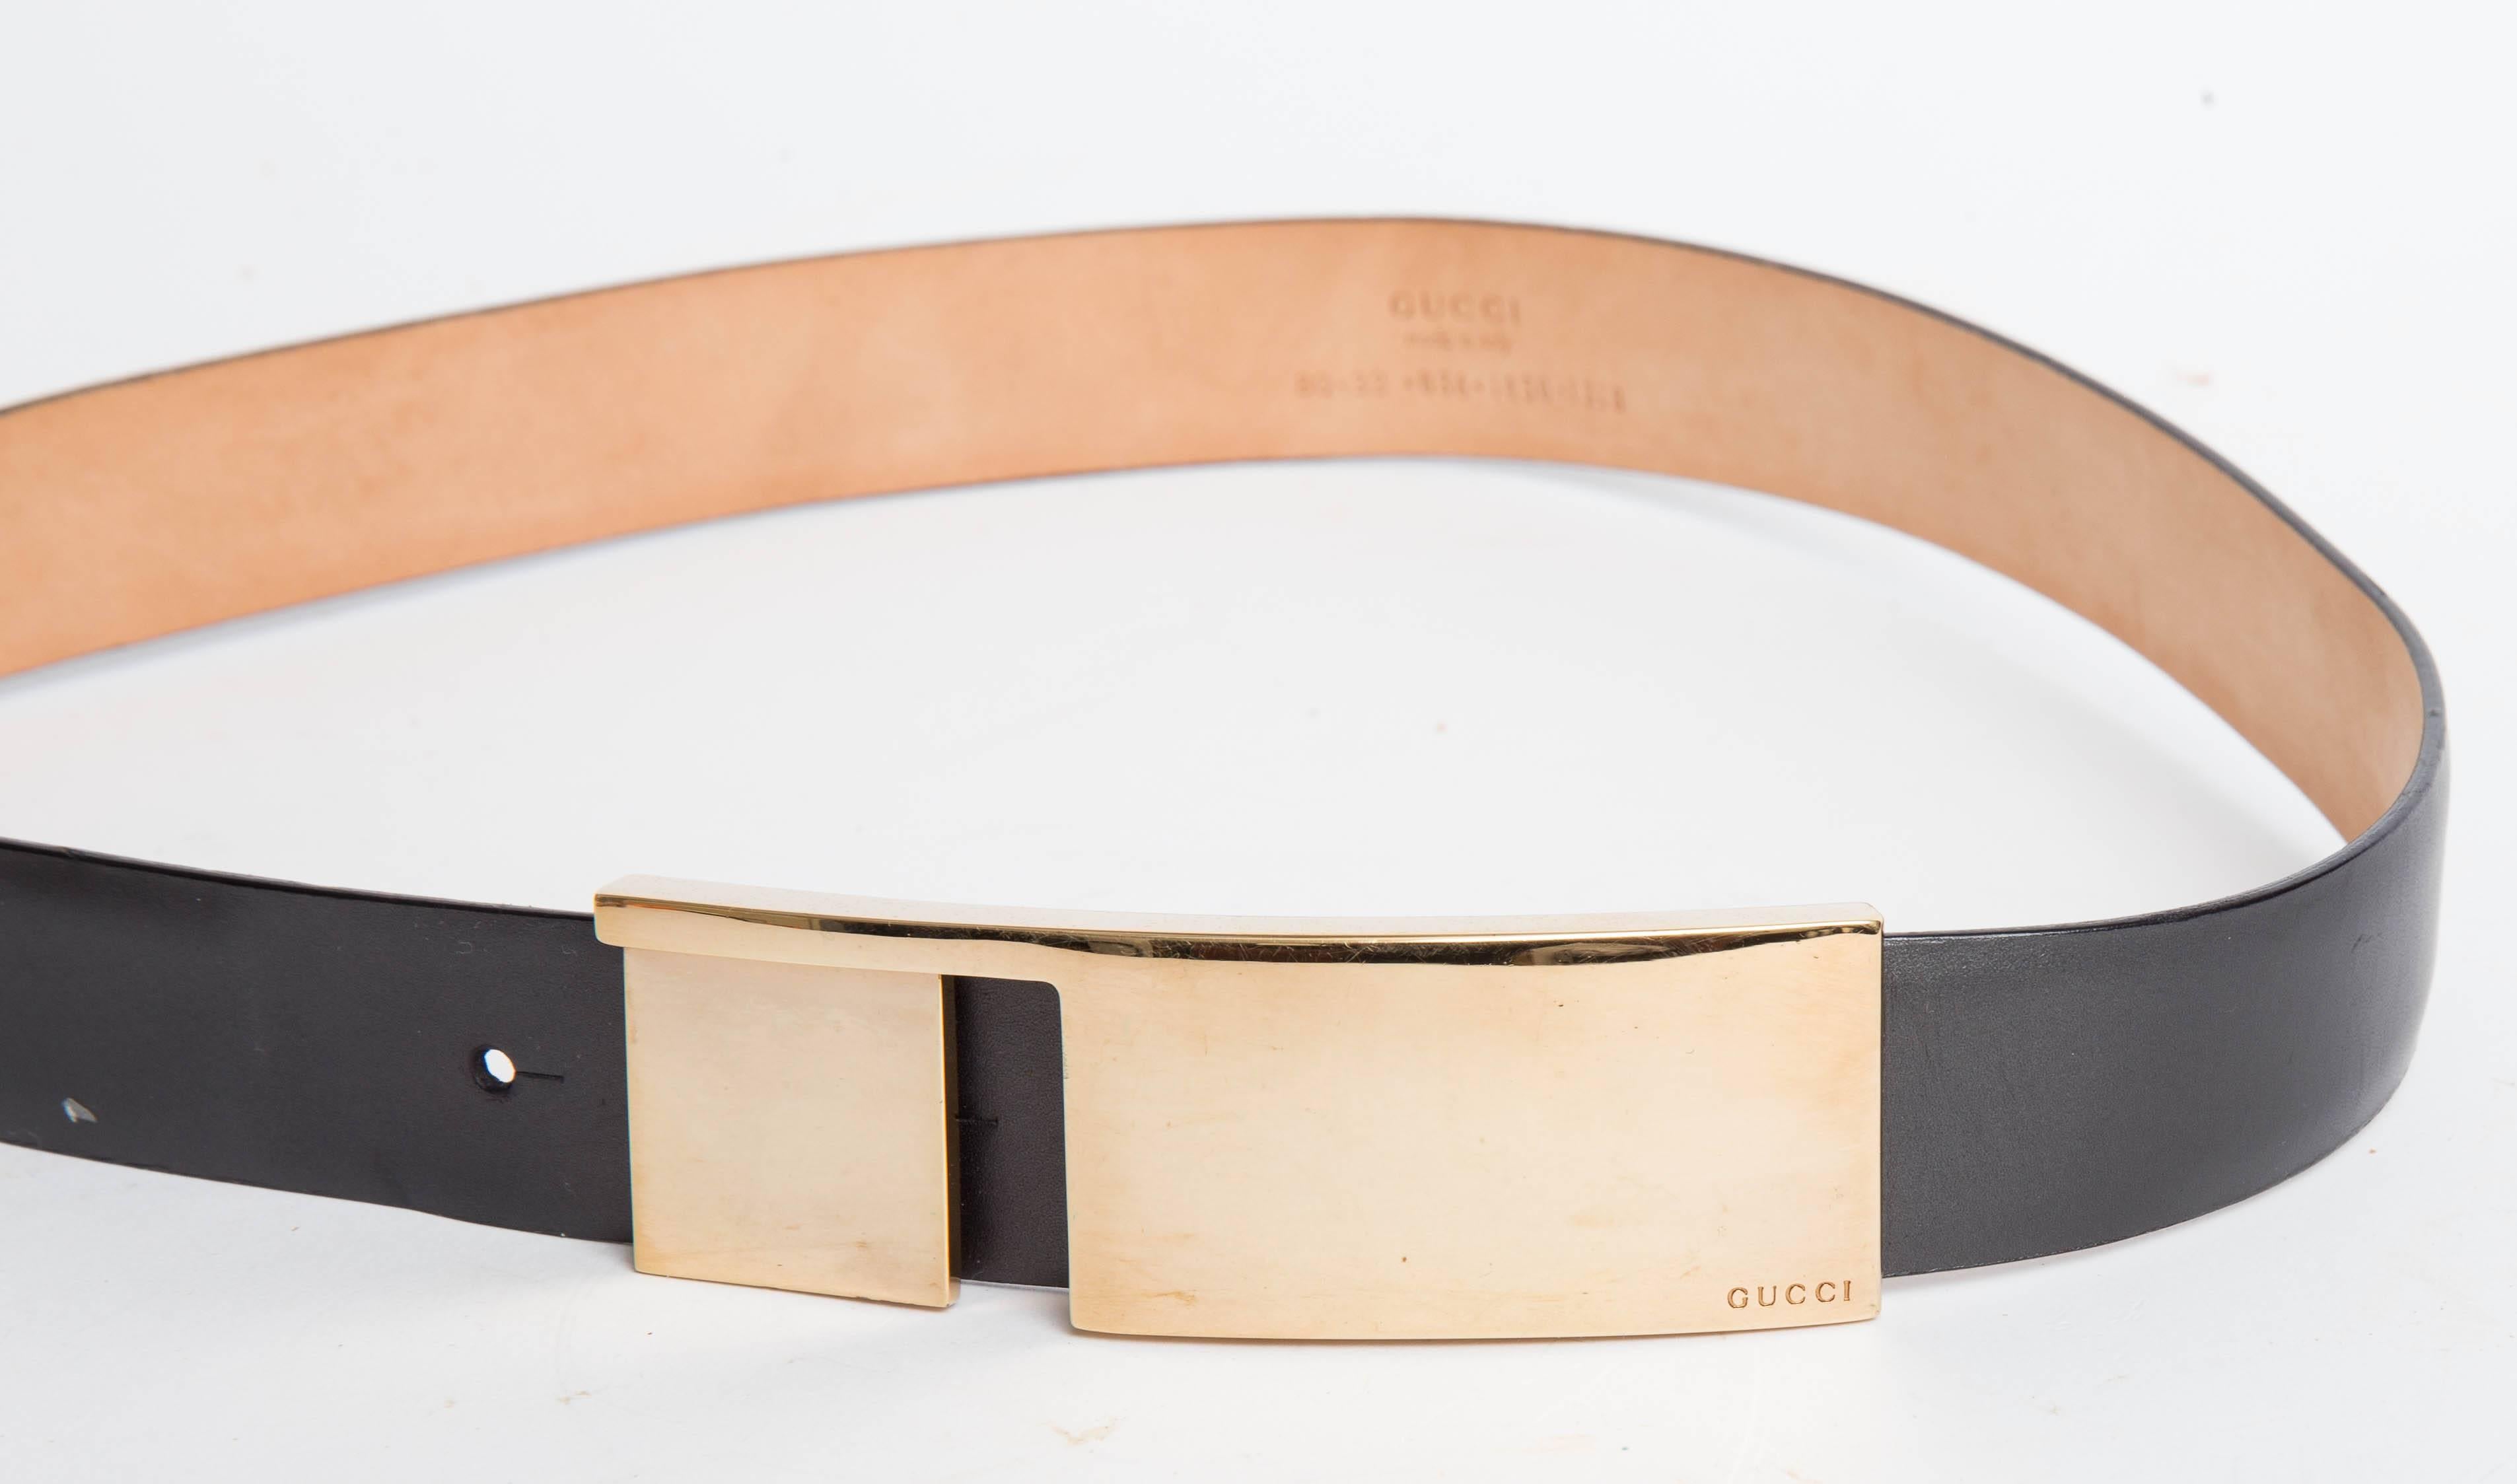 Stunning and sculptural Gucci belt with a very beautiful signed gold clasp. This black leather belt has hints of pearlized grey making the color very subtle and quite beautiful. There are four perforations in the belt allowing adjustments to length